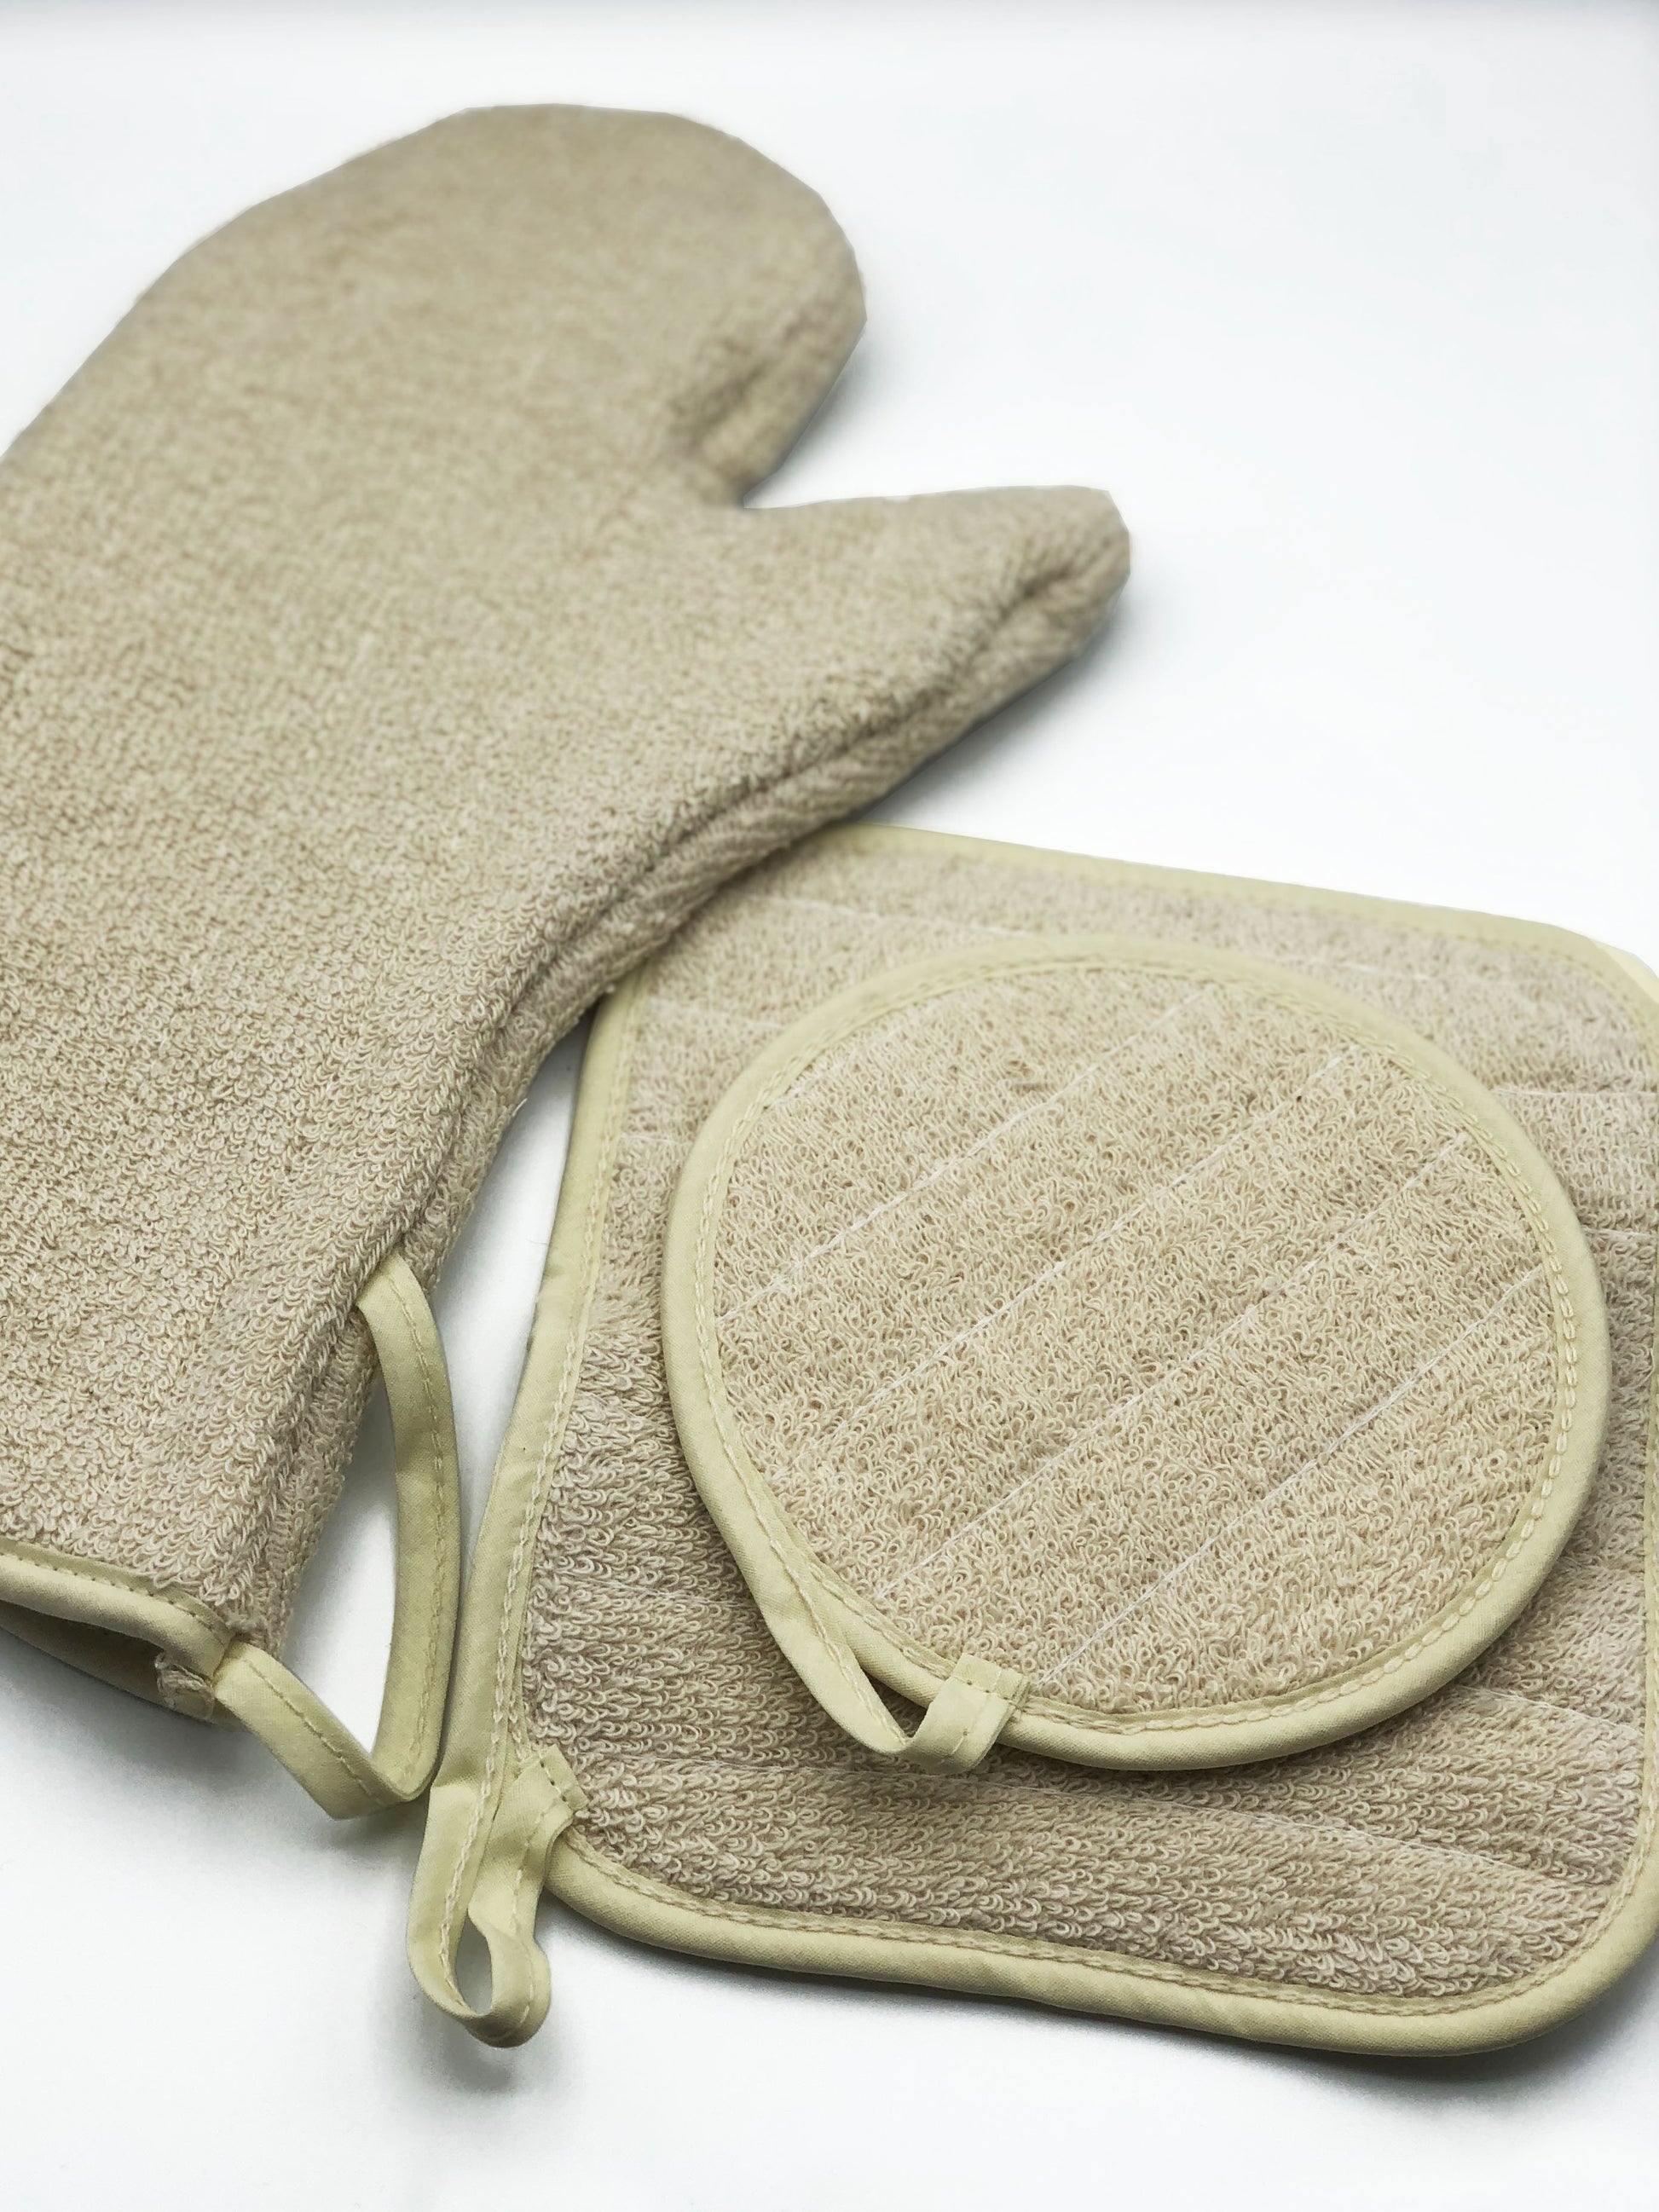 Made in the USA Oven Mitt - American Home USA